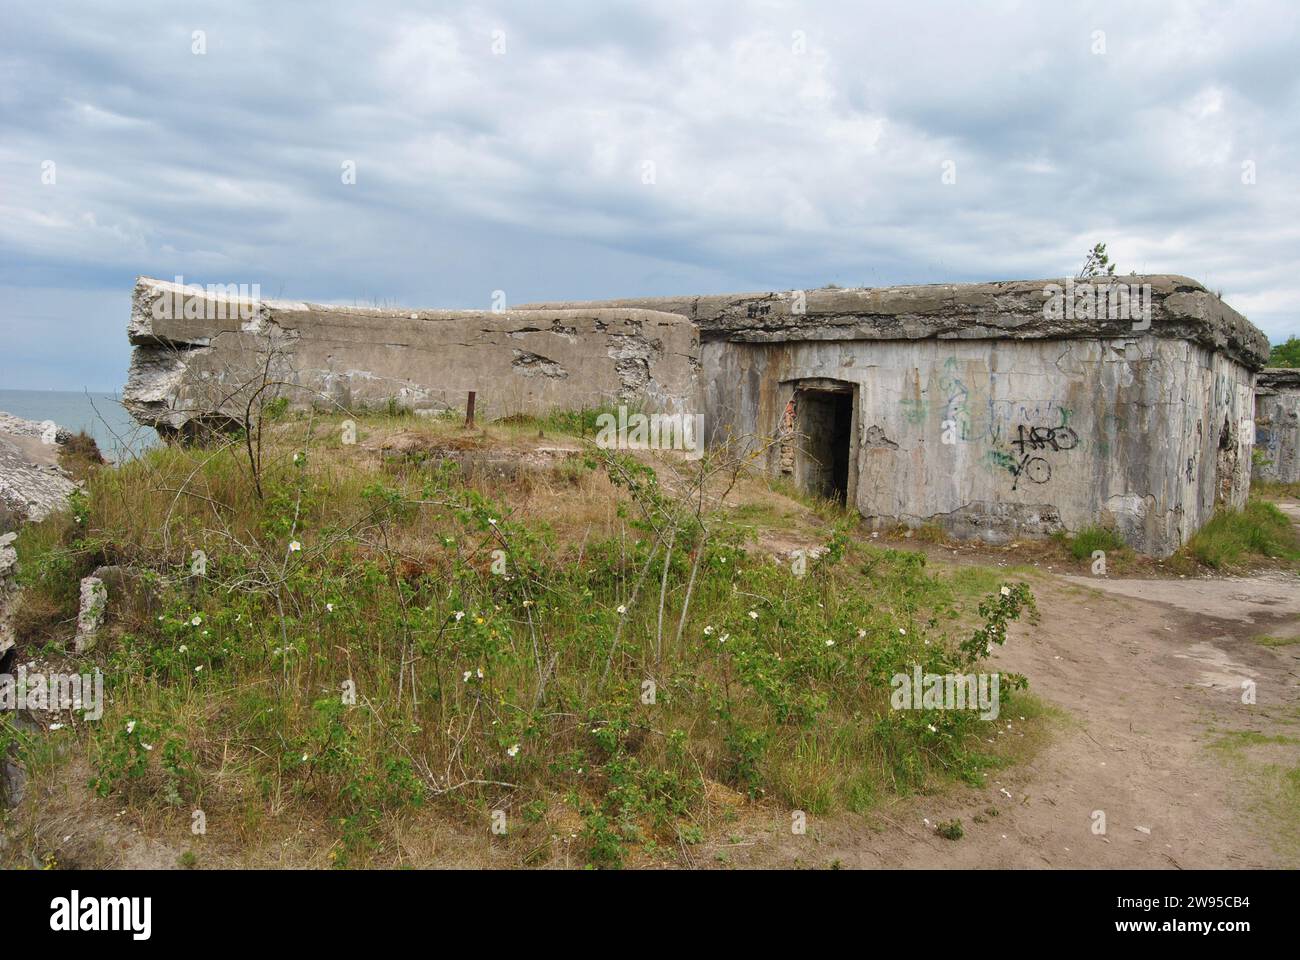 Ruins of the czarist era Northern Forts in Liepaja, Latvia on the Baltic Sea Stock Photo